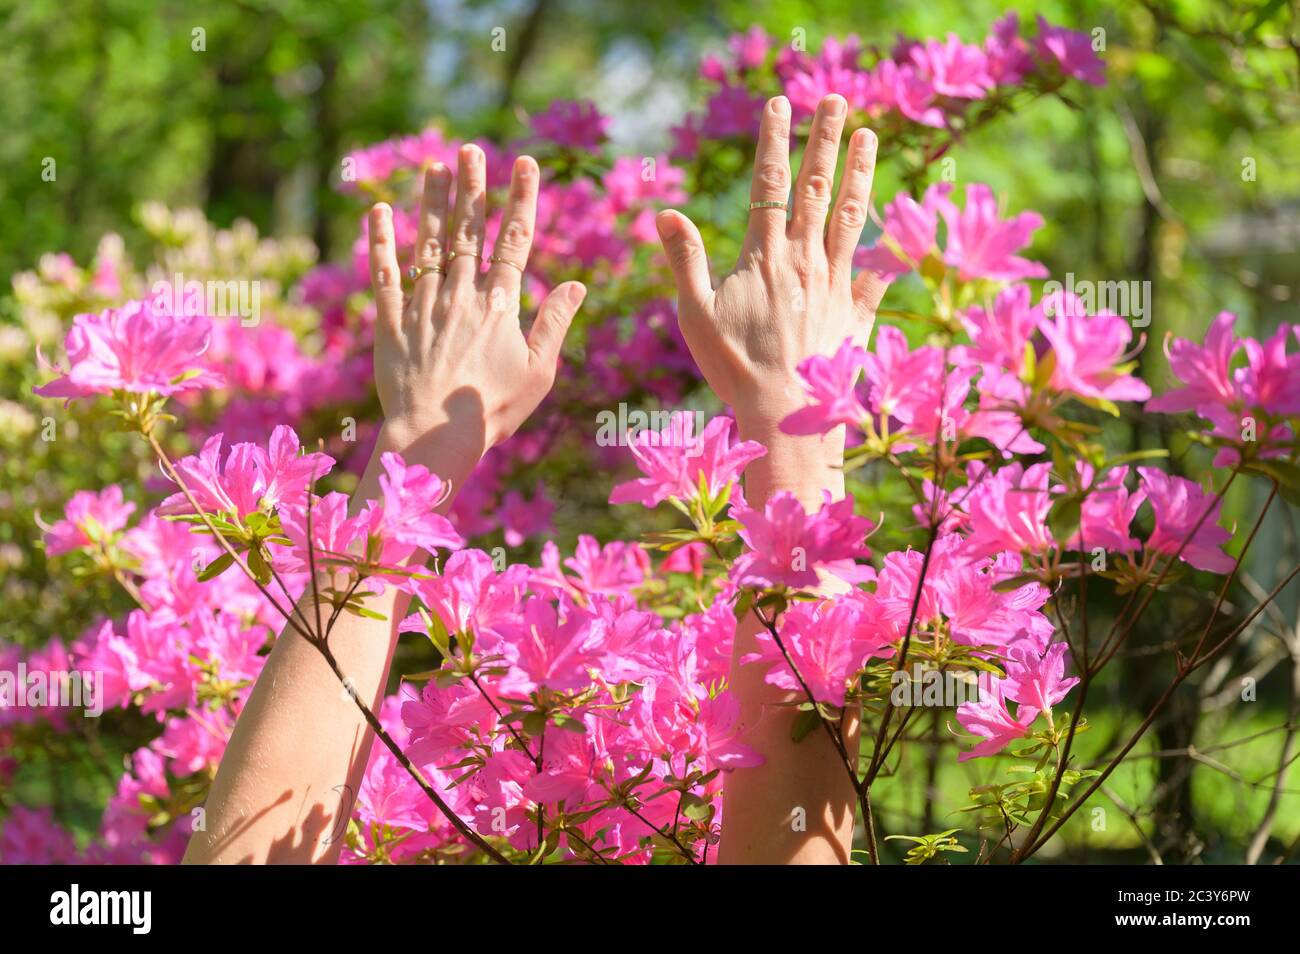 Female hands among pink flowers Stock Photo